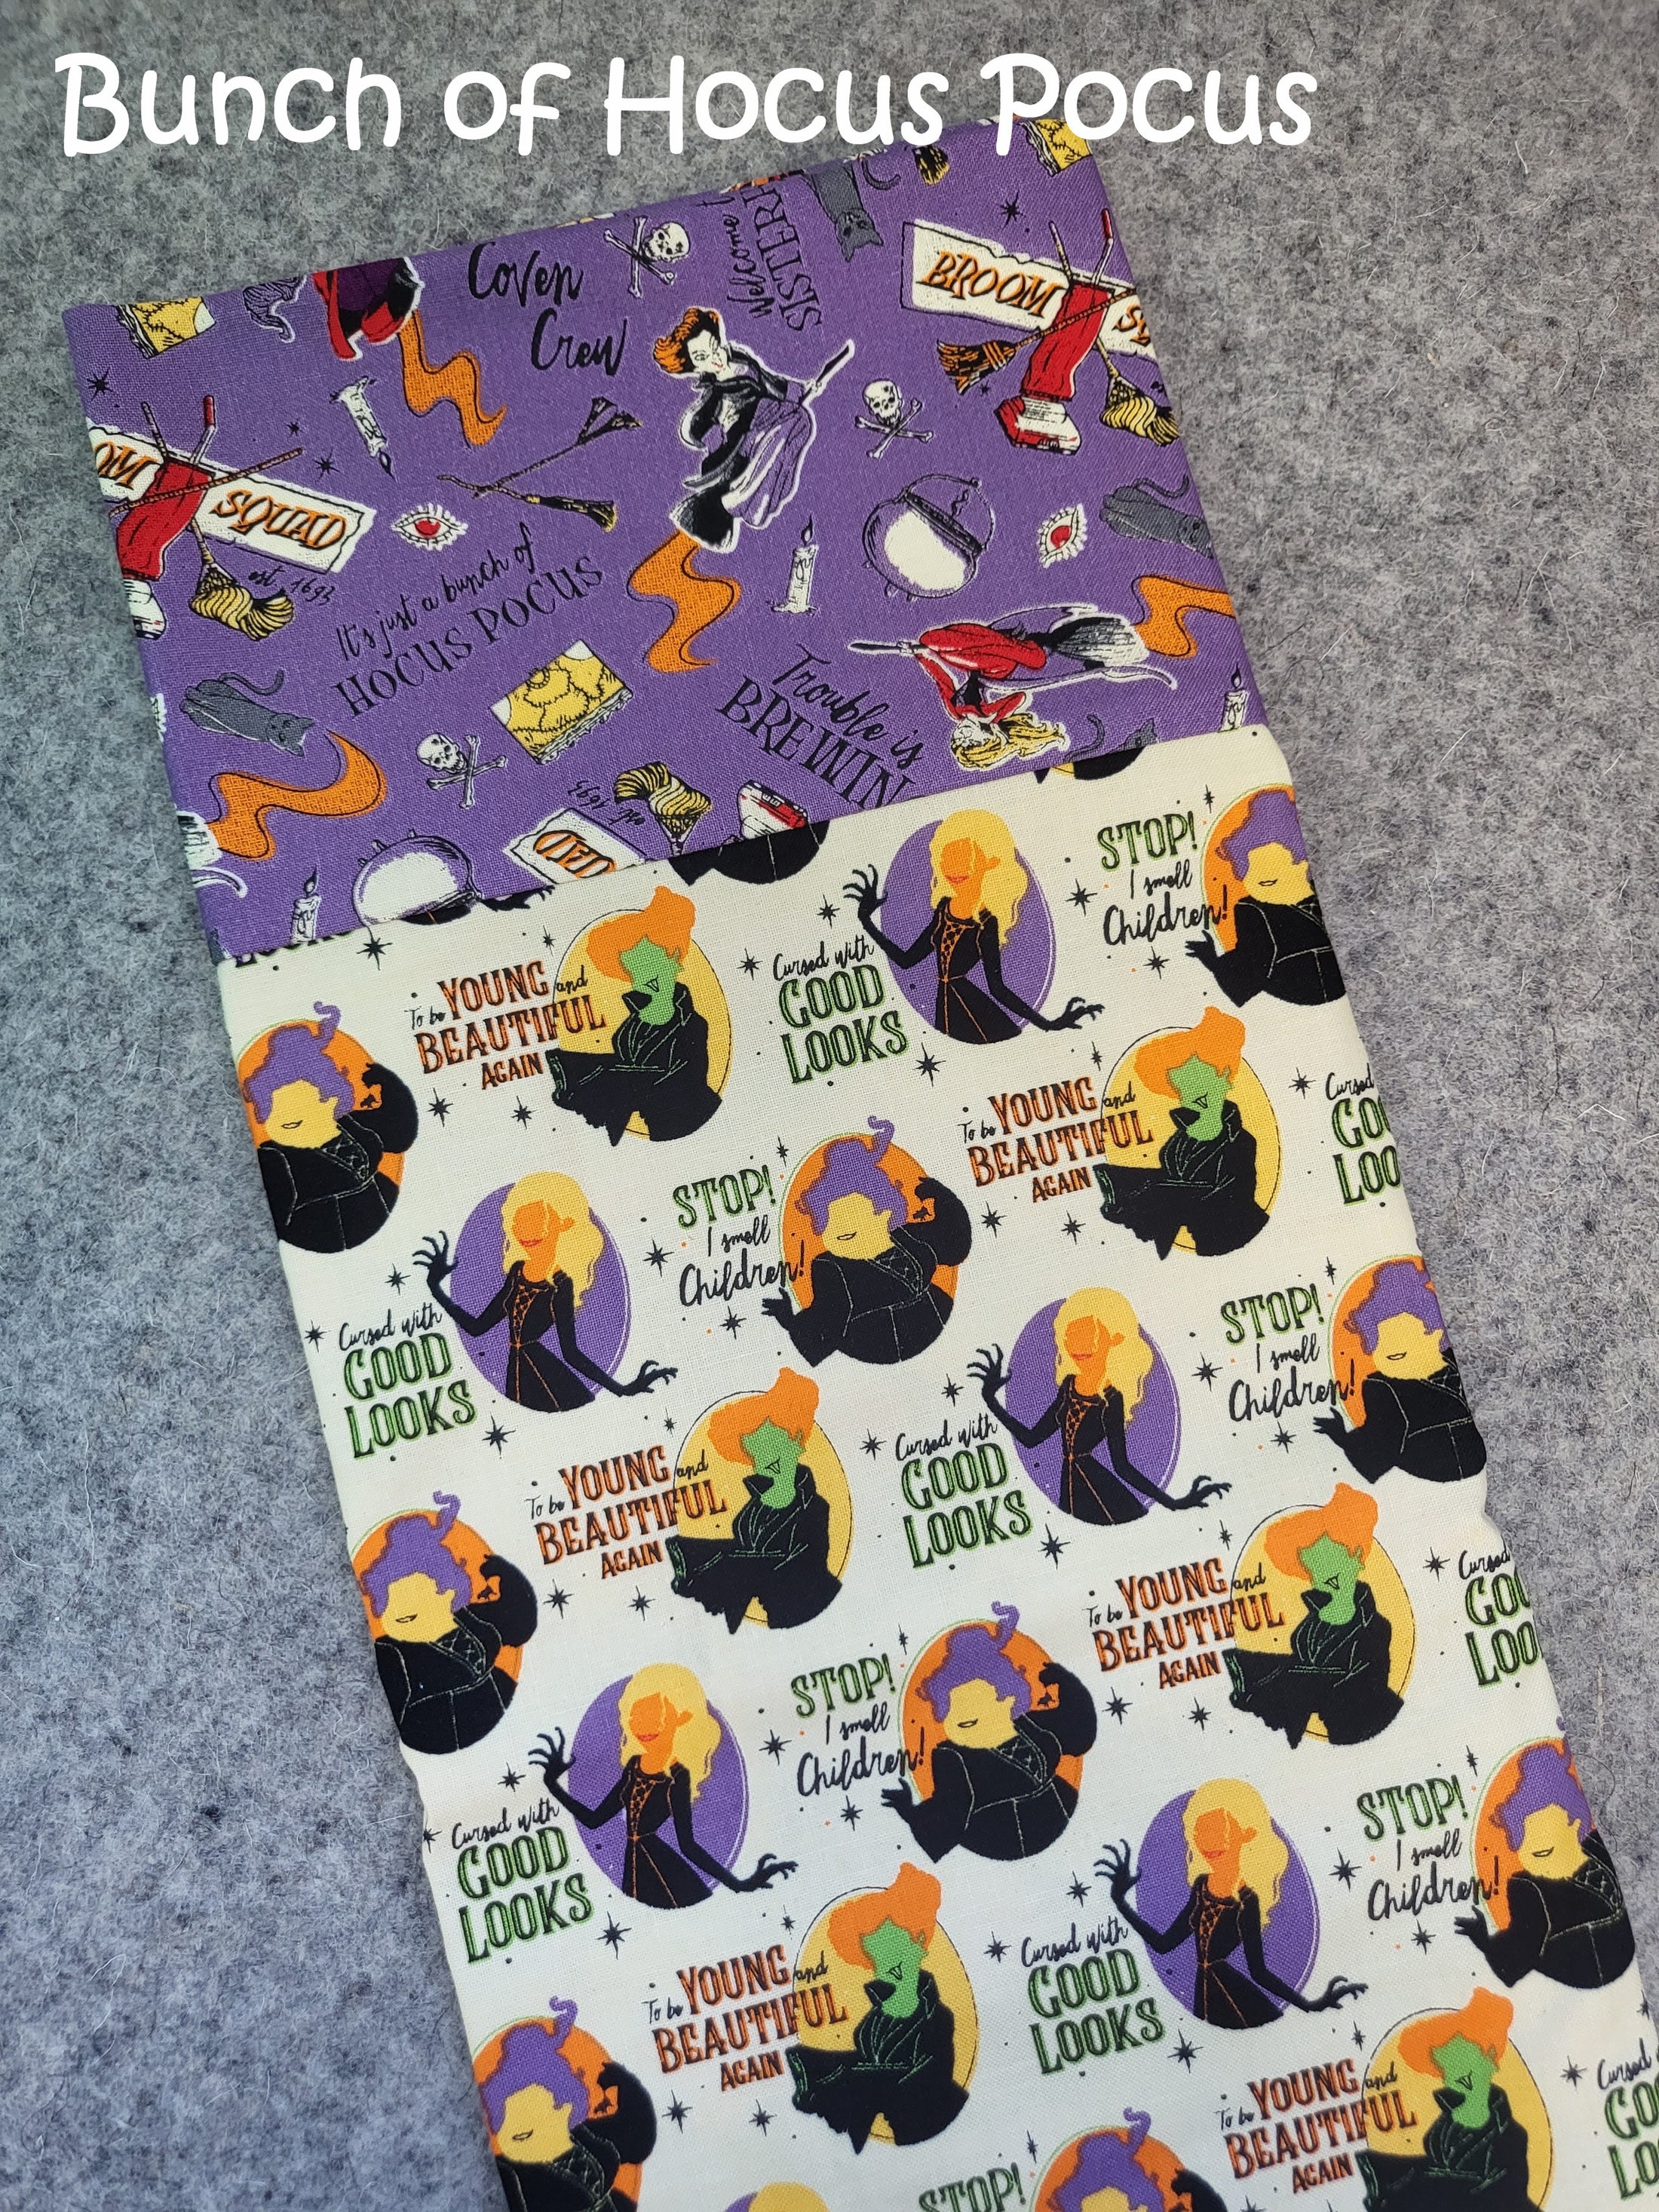 Bunch of hocus pocus halloween pillowcase for trick-or-treating.